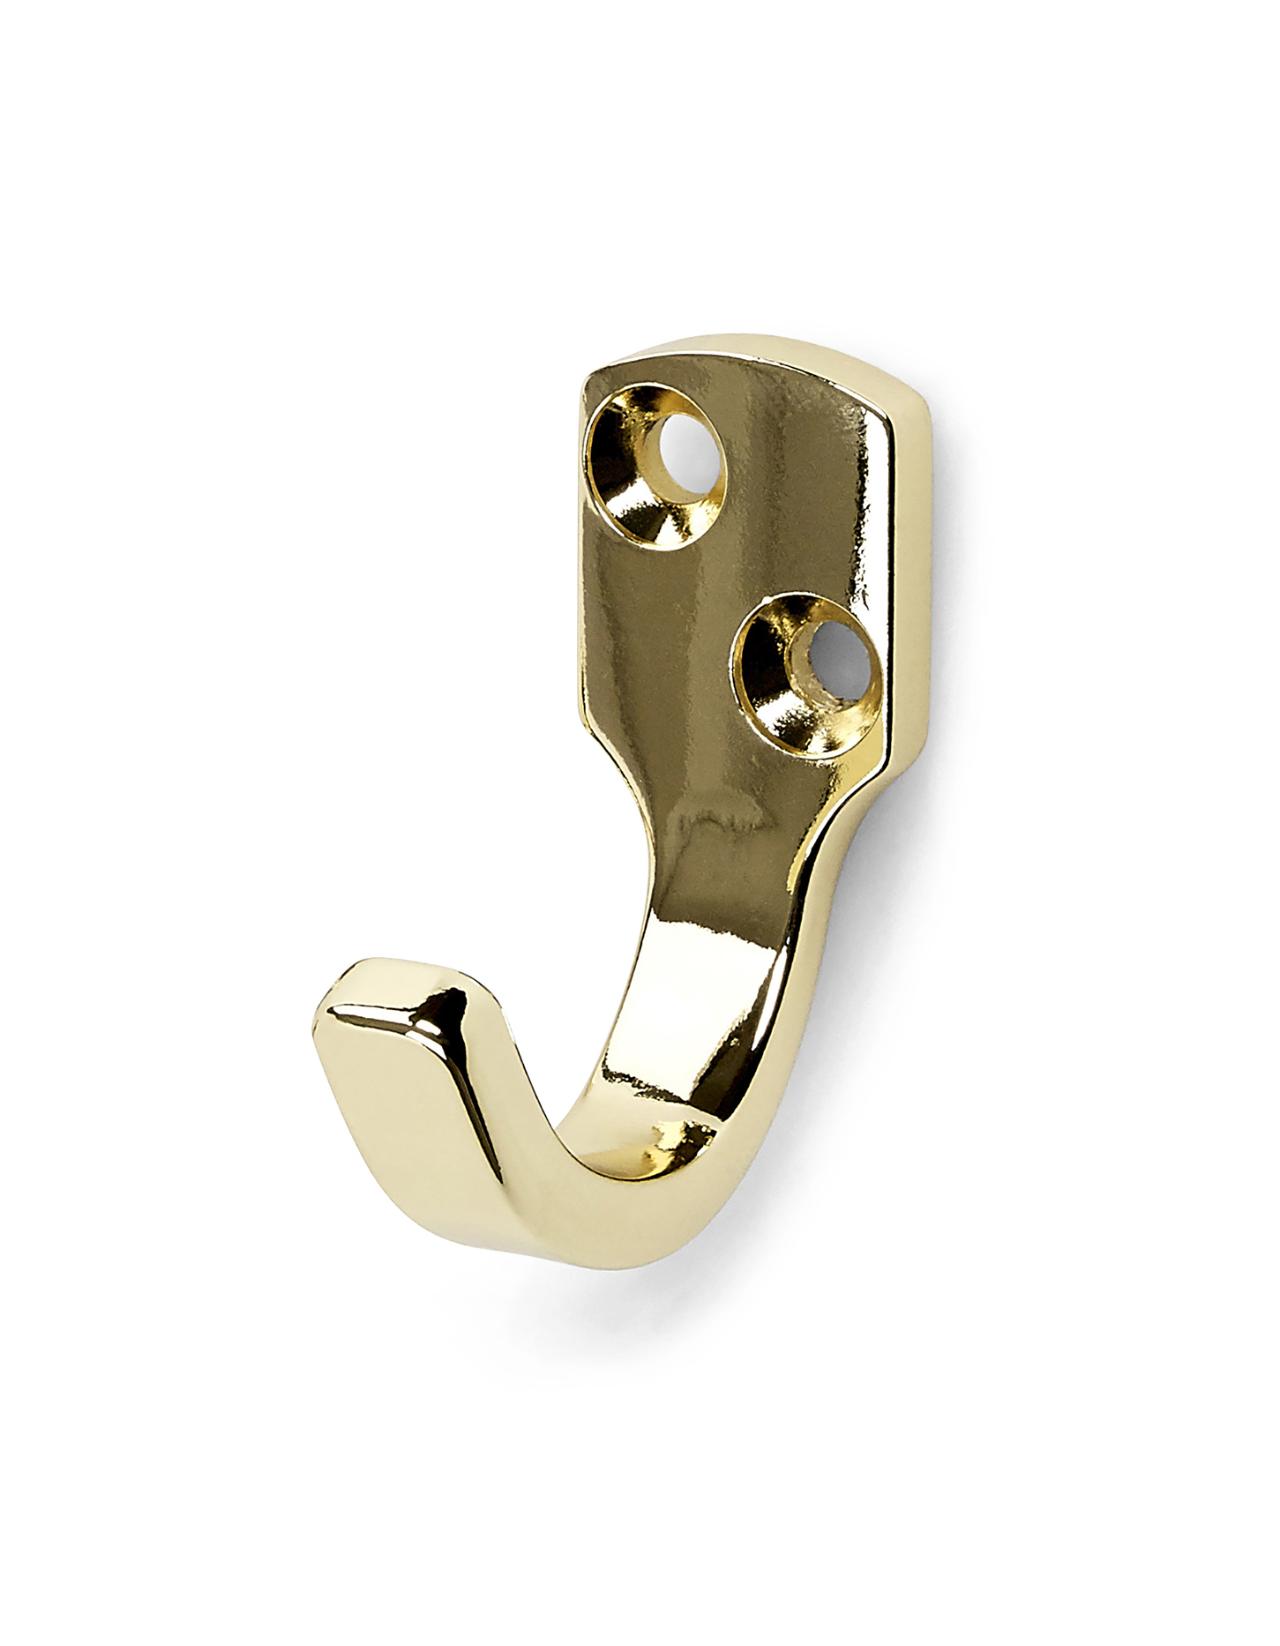 Nice coat hook in polished brass, large quantities in stock